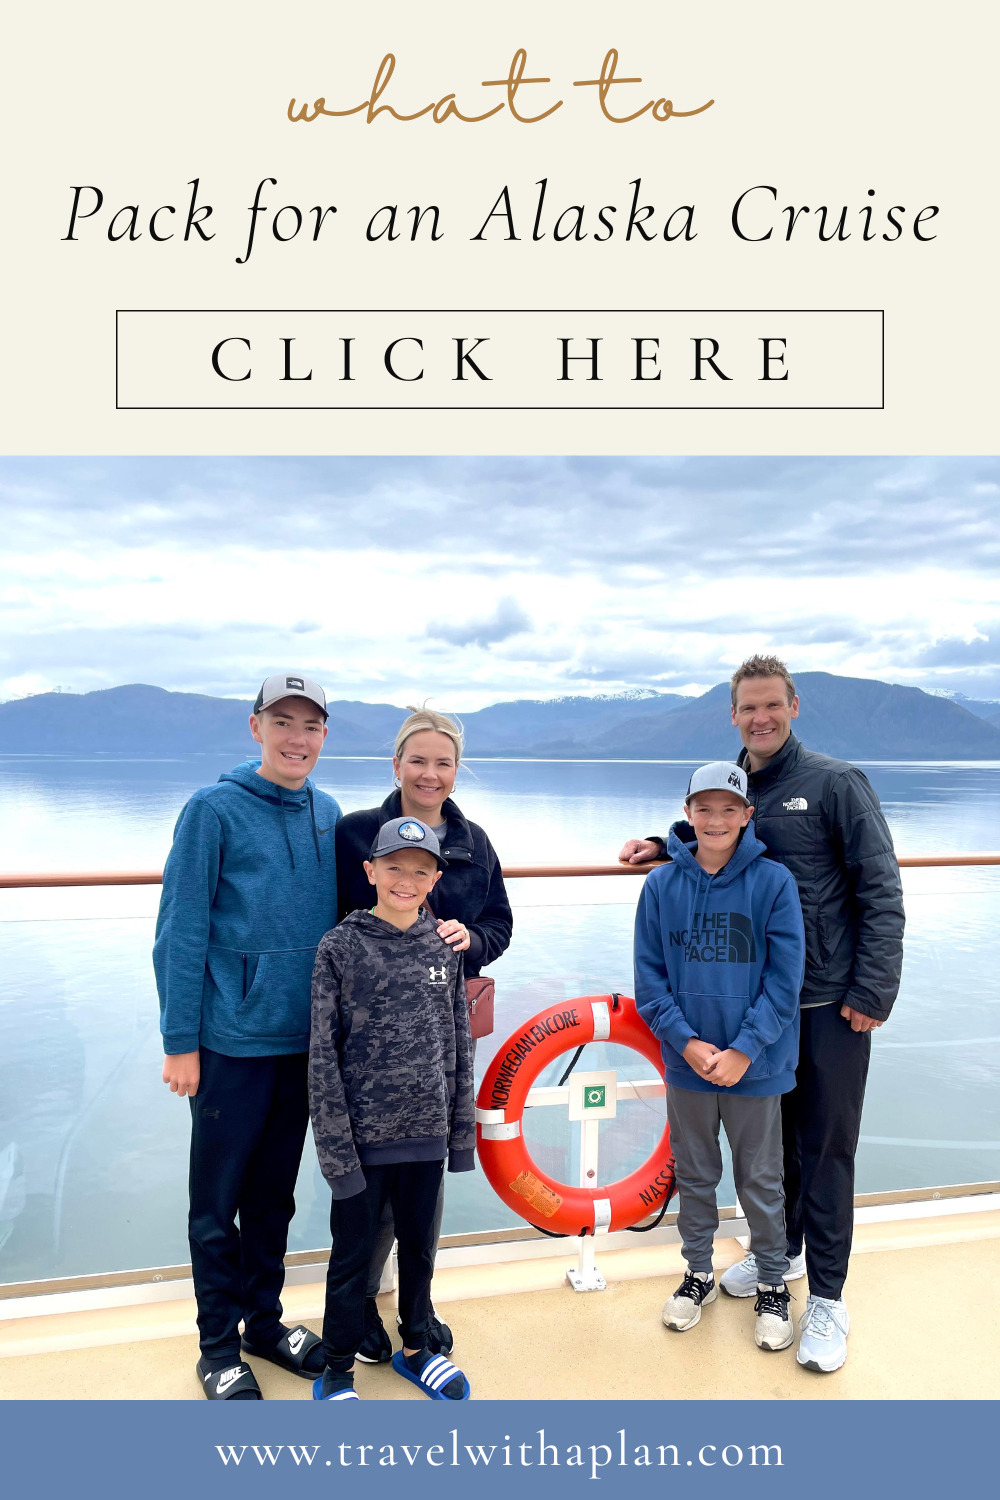 Find out what to wear on an Alaska cruise from top US family travel blog, Travel With A Plan!